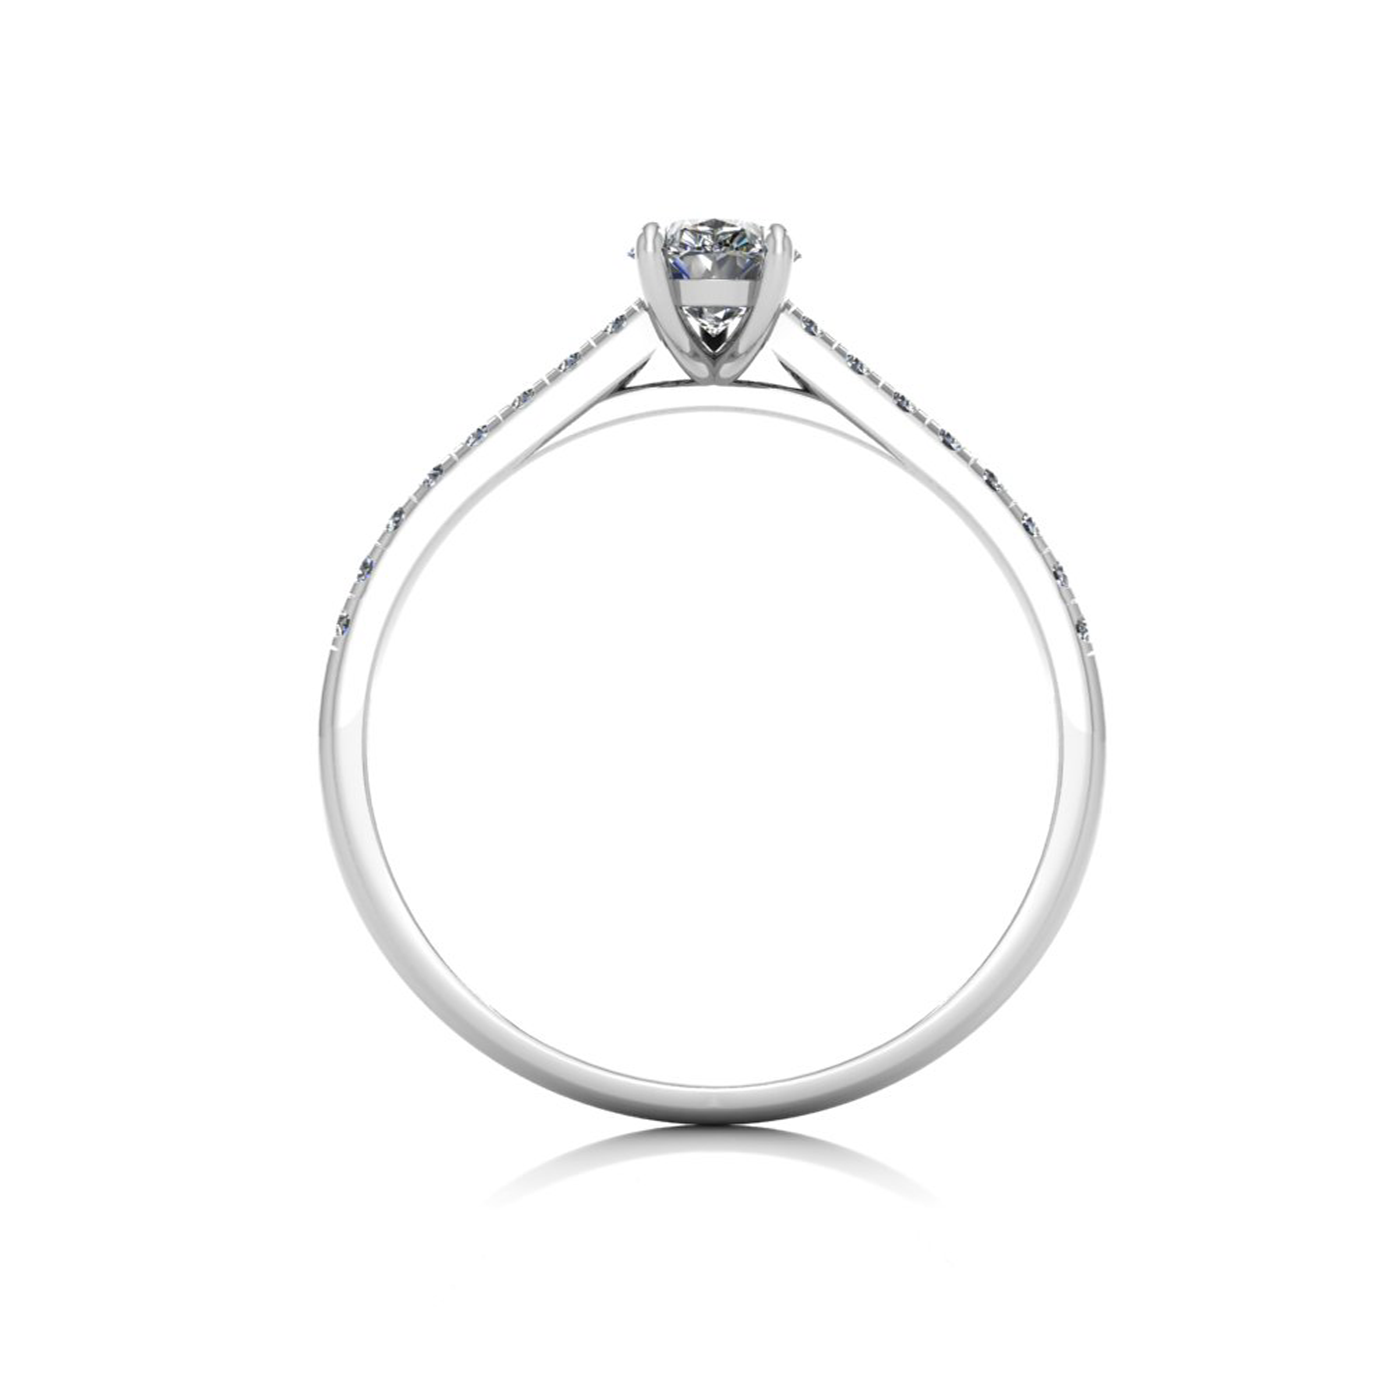 18k white gold  0,50 ct 3 prongs pear diamond engagement ring with whisper thin pavÉ set band